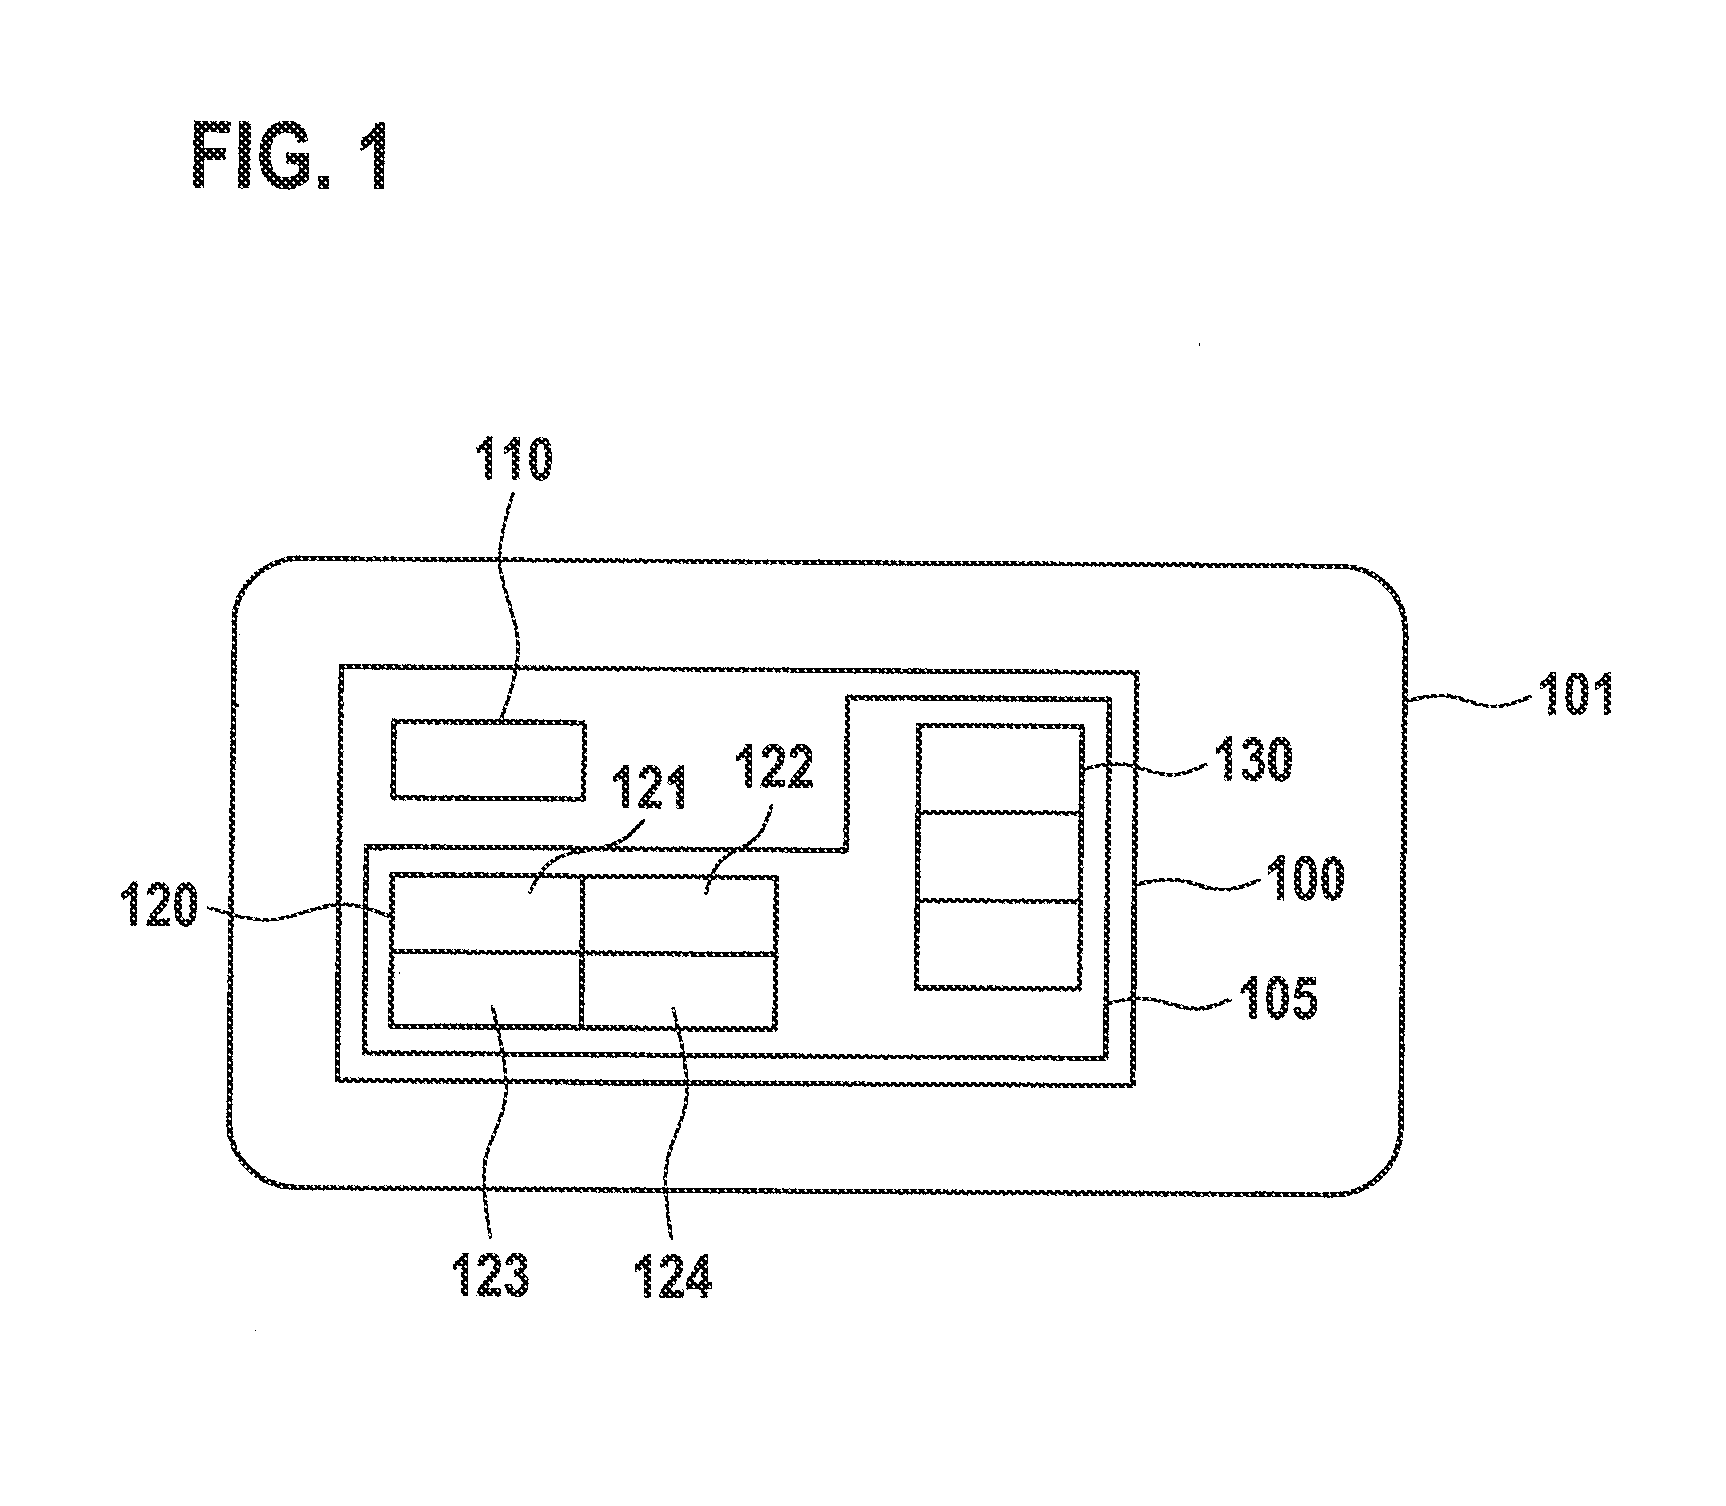 Method for generating a cryptographic key in a system-on-a-chip